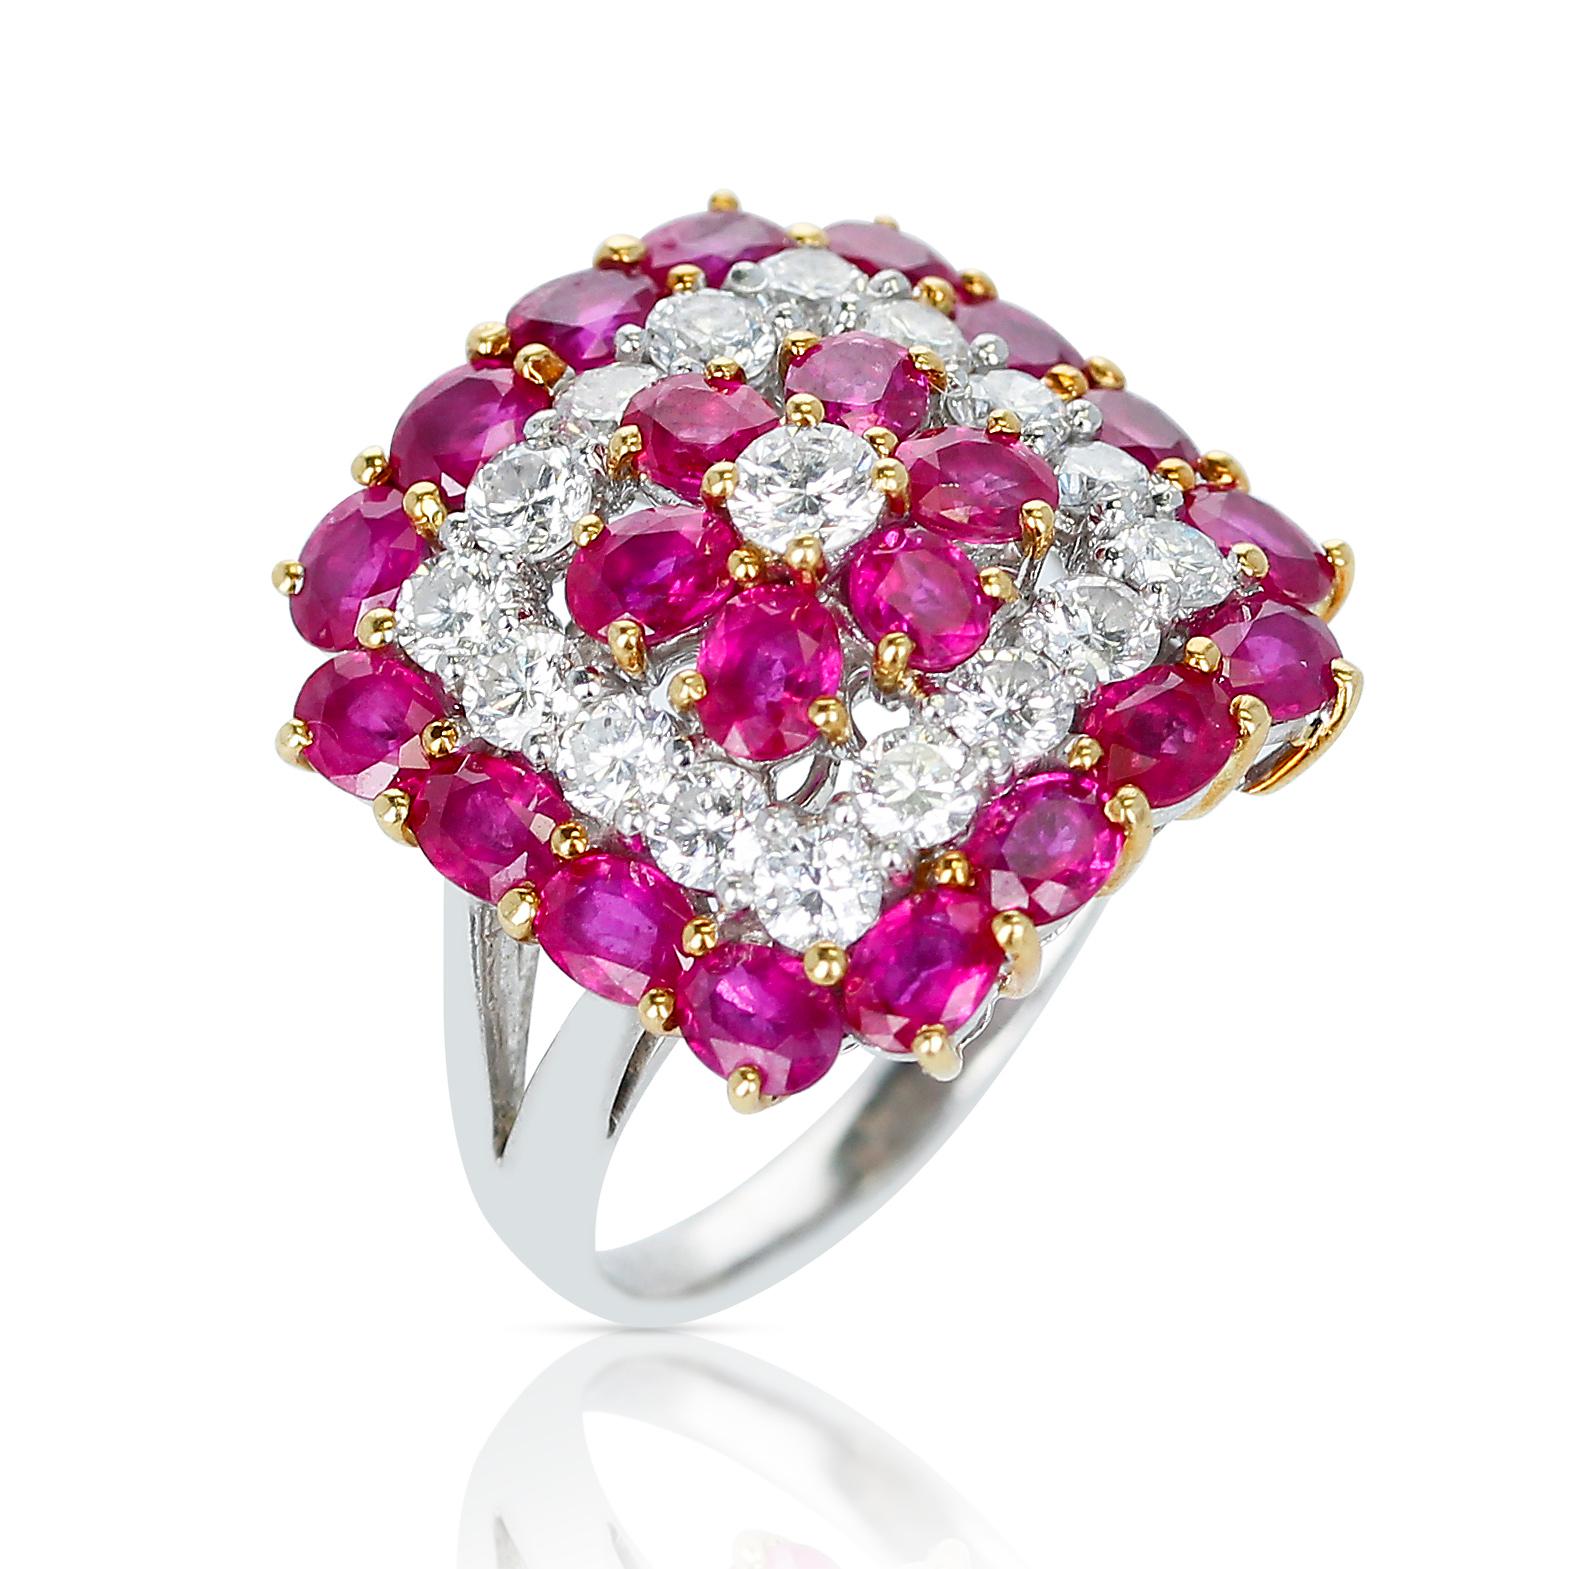 Round Cut Floral-Design Round 4.19 Ct. Ruby and 1.50 Ct. Diamond Ring, Platinum & 18k Gold For Sale